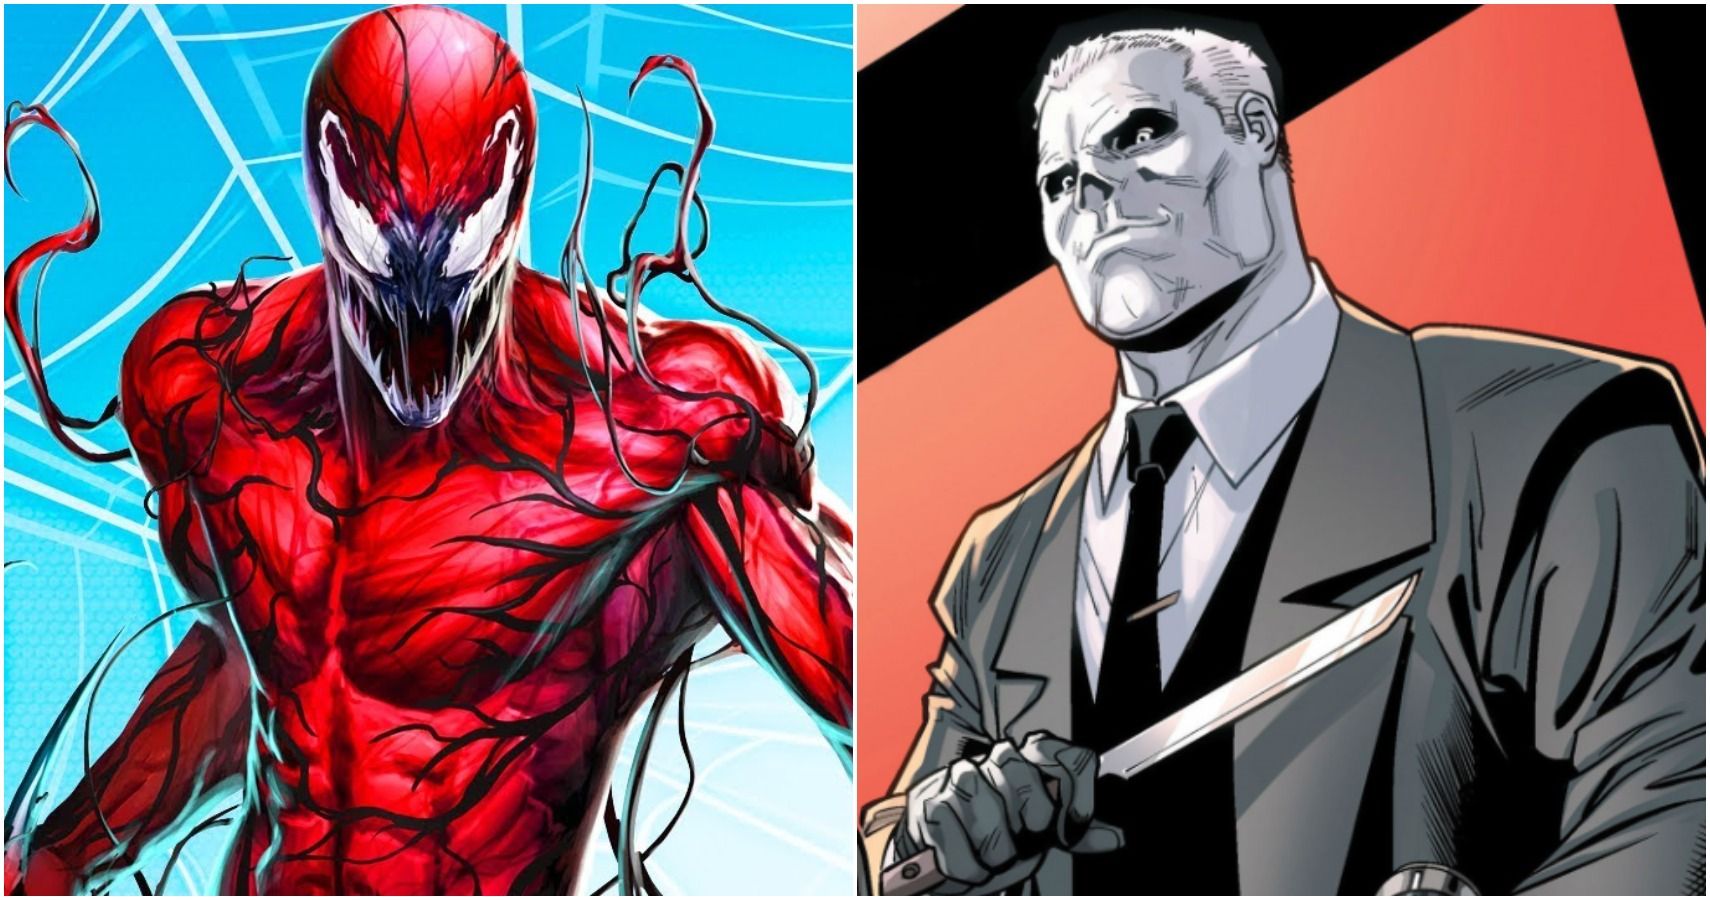 Top 5 Underrated Spider-Man Villains (& Top 5 Overrated)